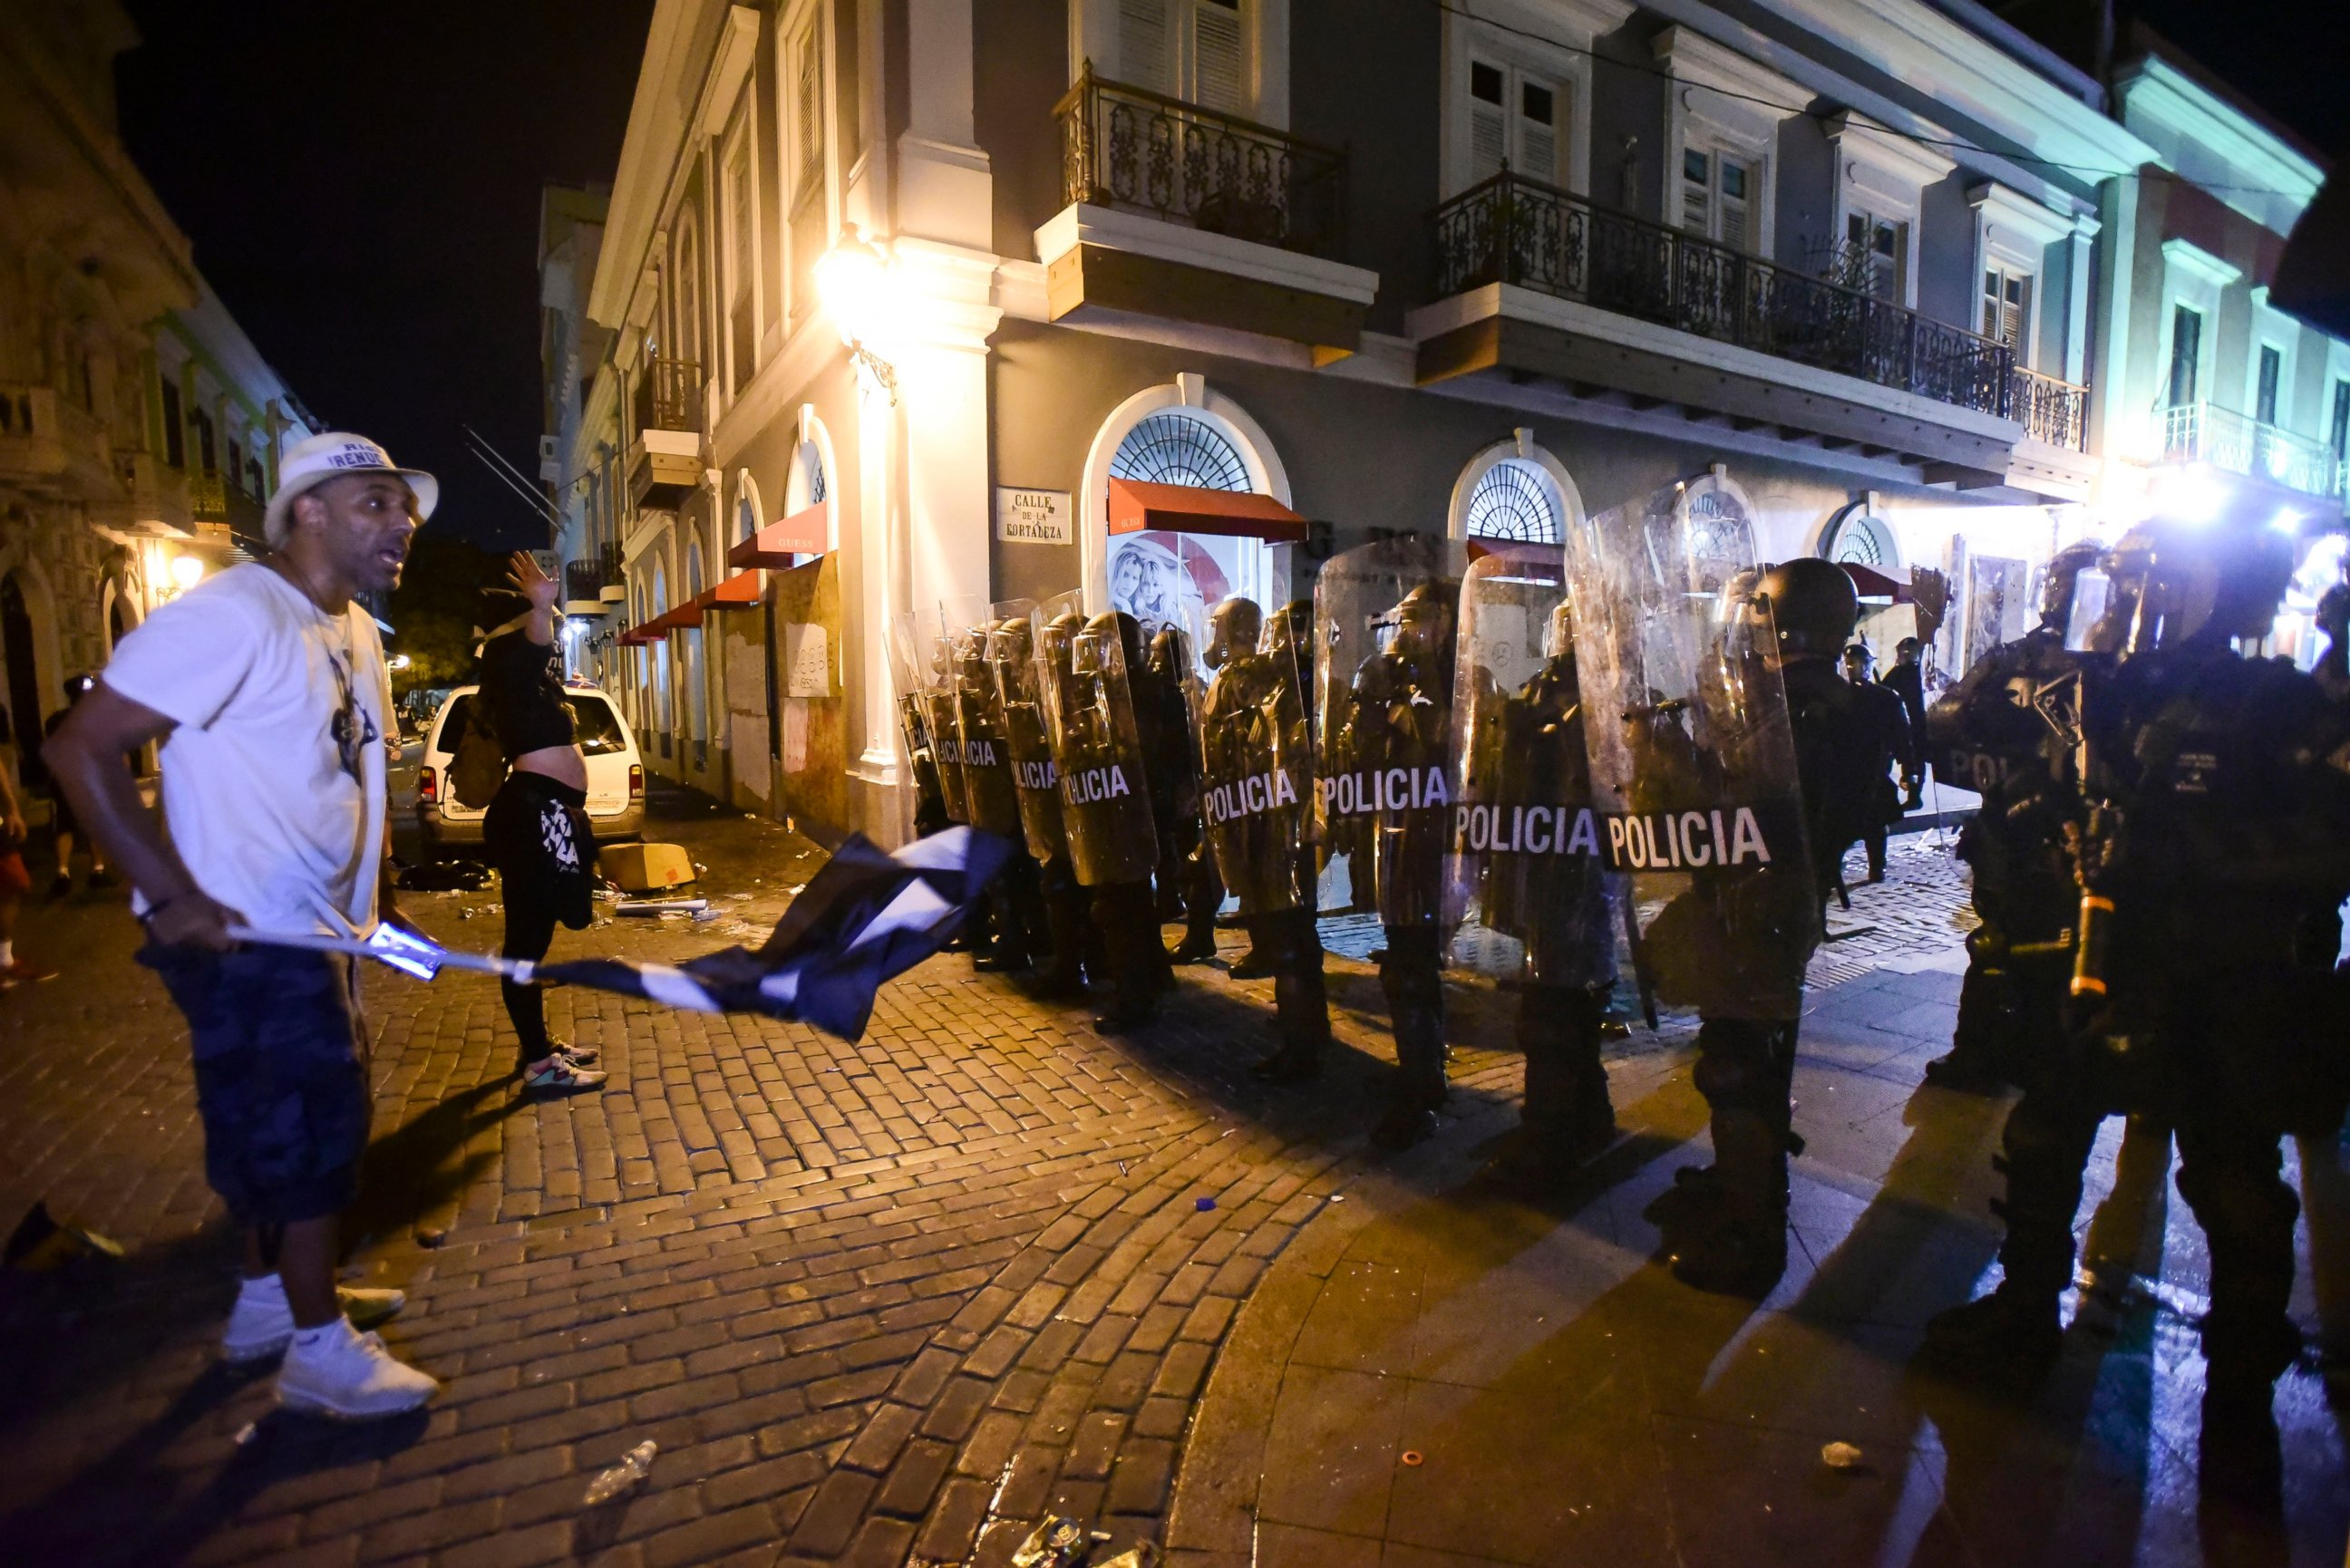 PHOTO: Demonstrators stand in front of riot control units during clashes in San Juan, Puerto Rico, Monday, July 22, 2019. Protesters are demanding Gov. Ricardo Rossello step down following the leak of an offensive, obscenity-laden online chat.